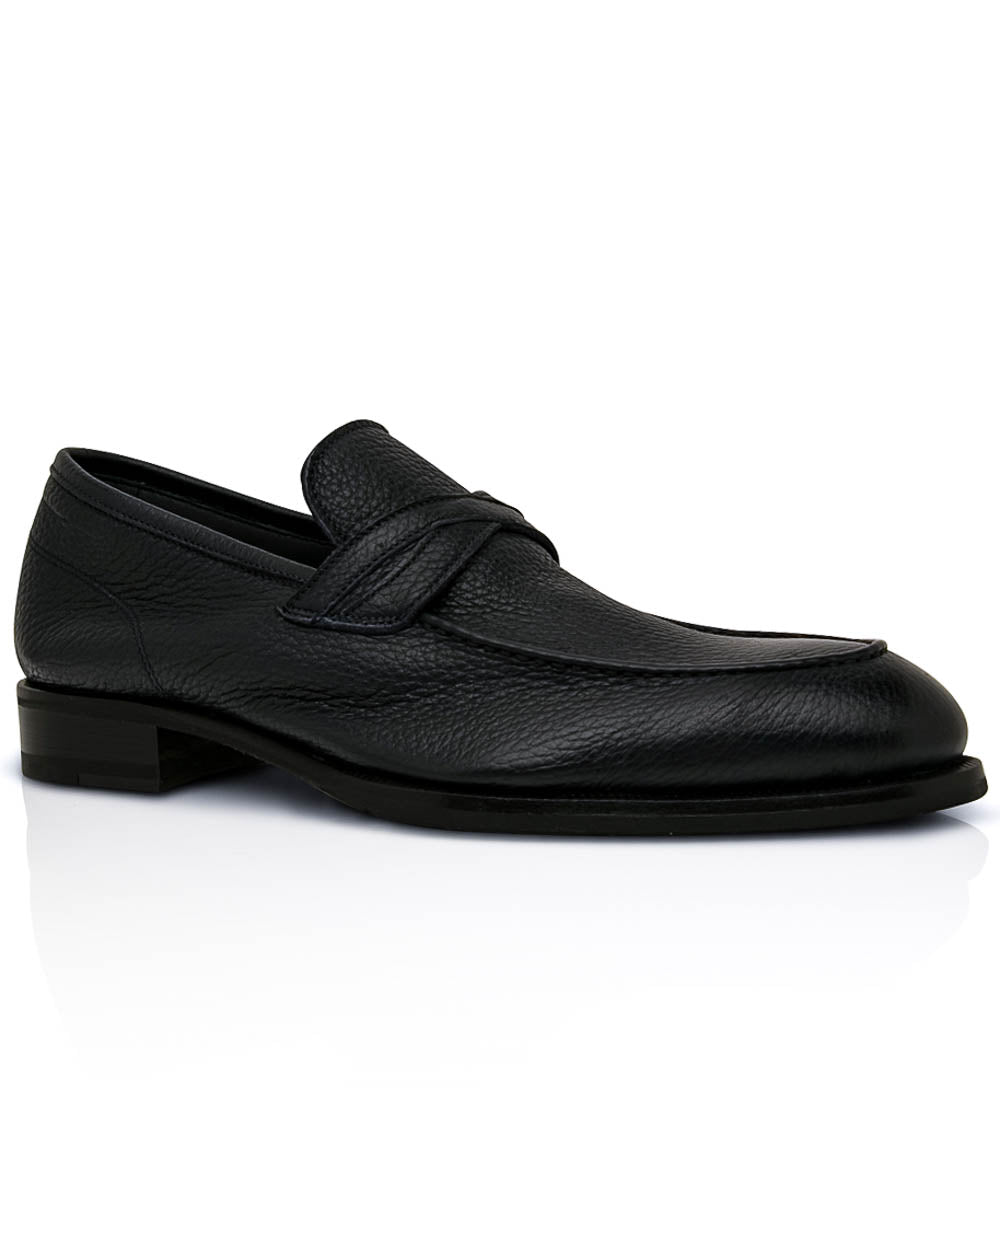 Abisso Crisscross Leather Loafer